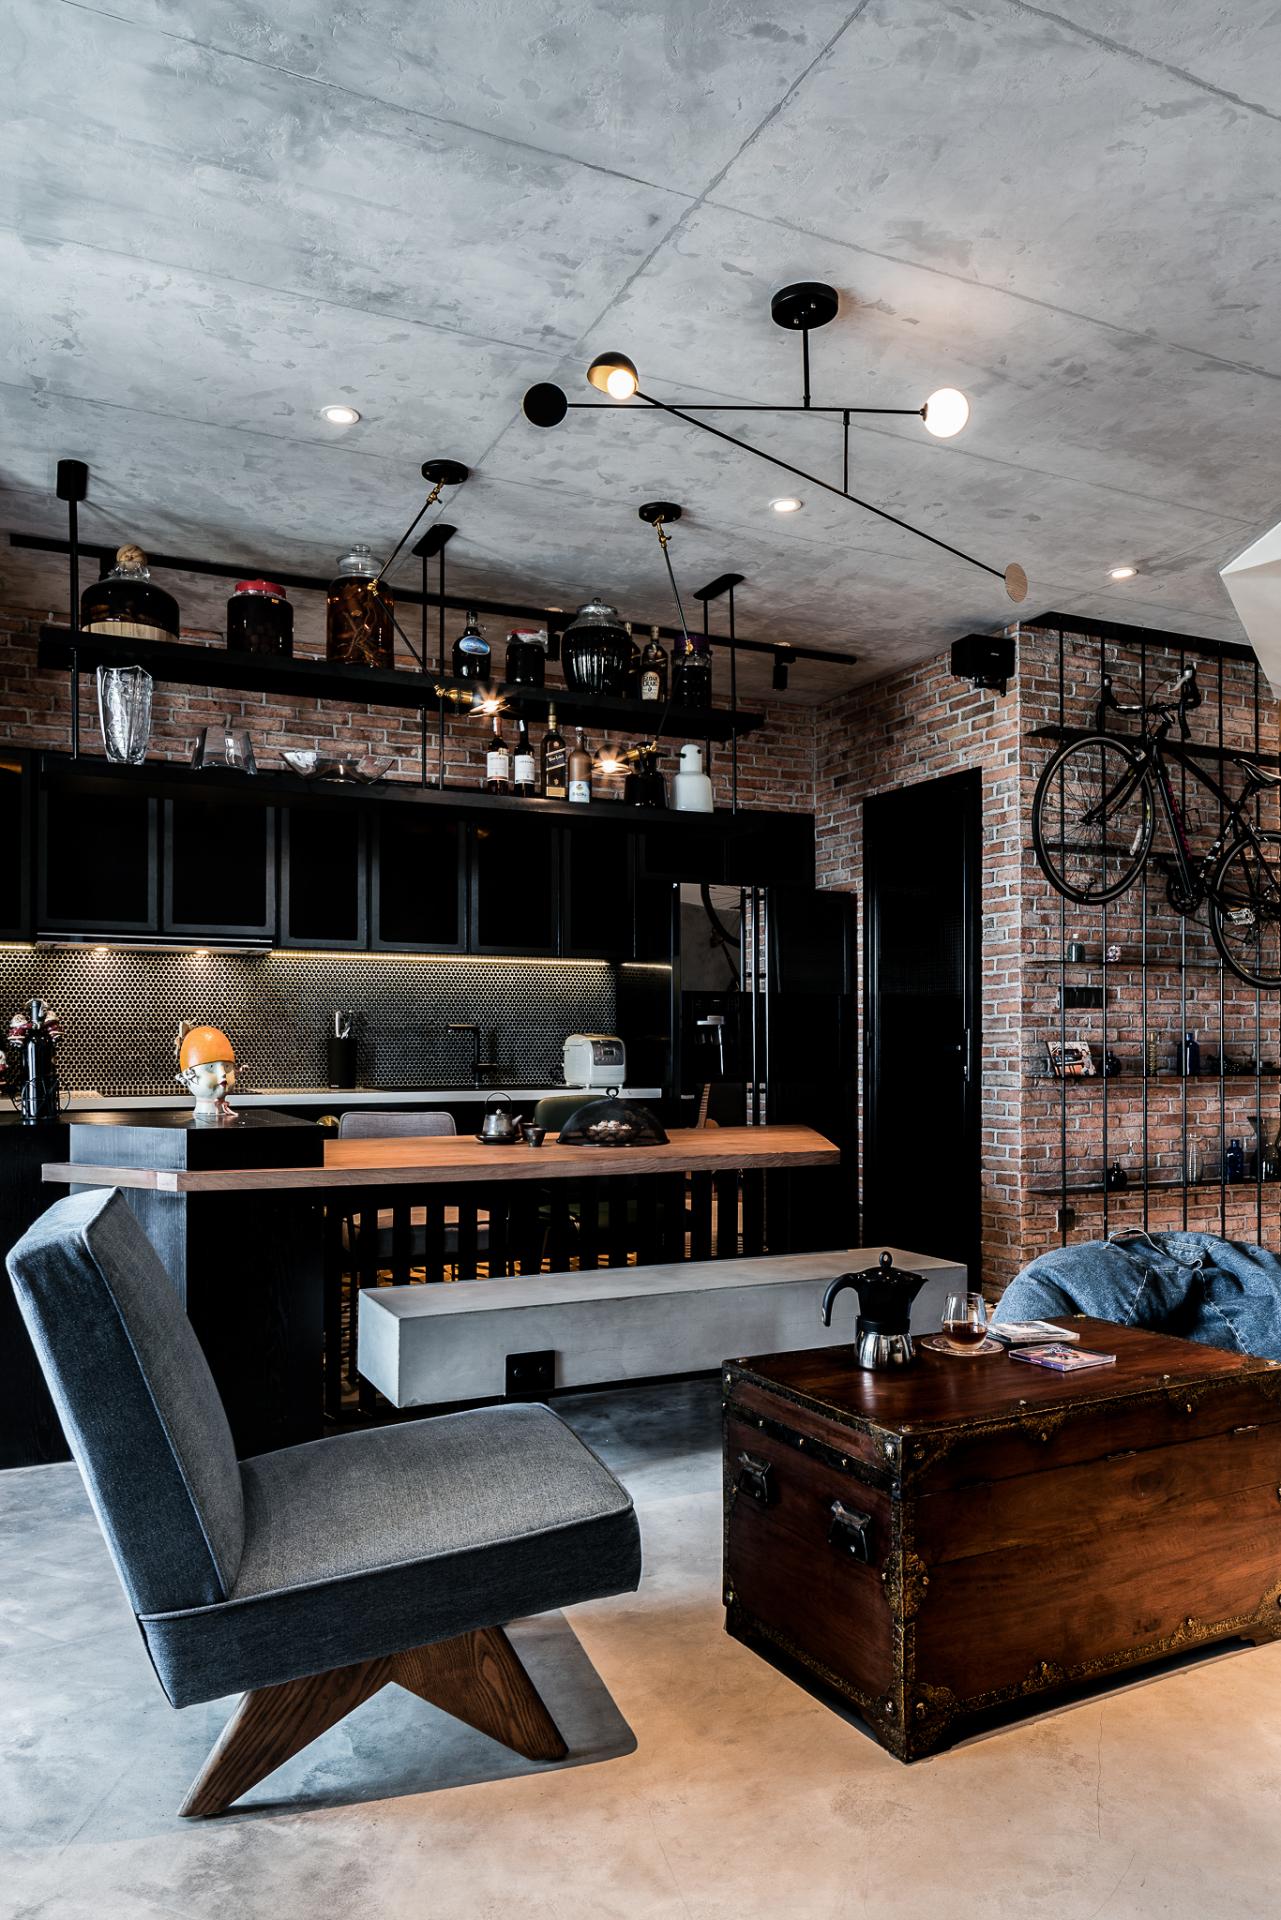 This 1,076 sq. ft. apartment has an industrial accent and a rustic "gangster" style